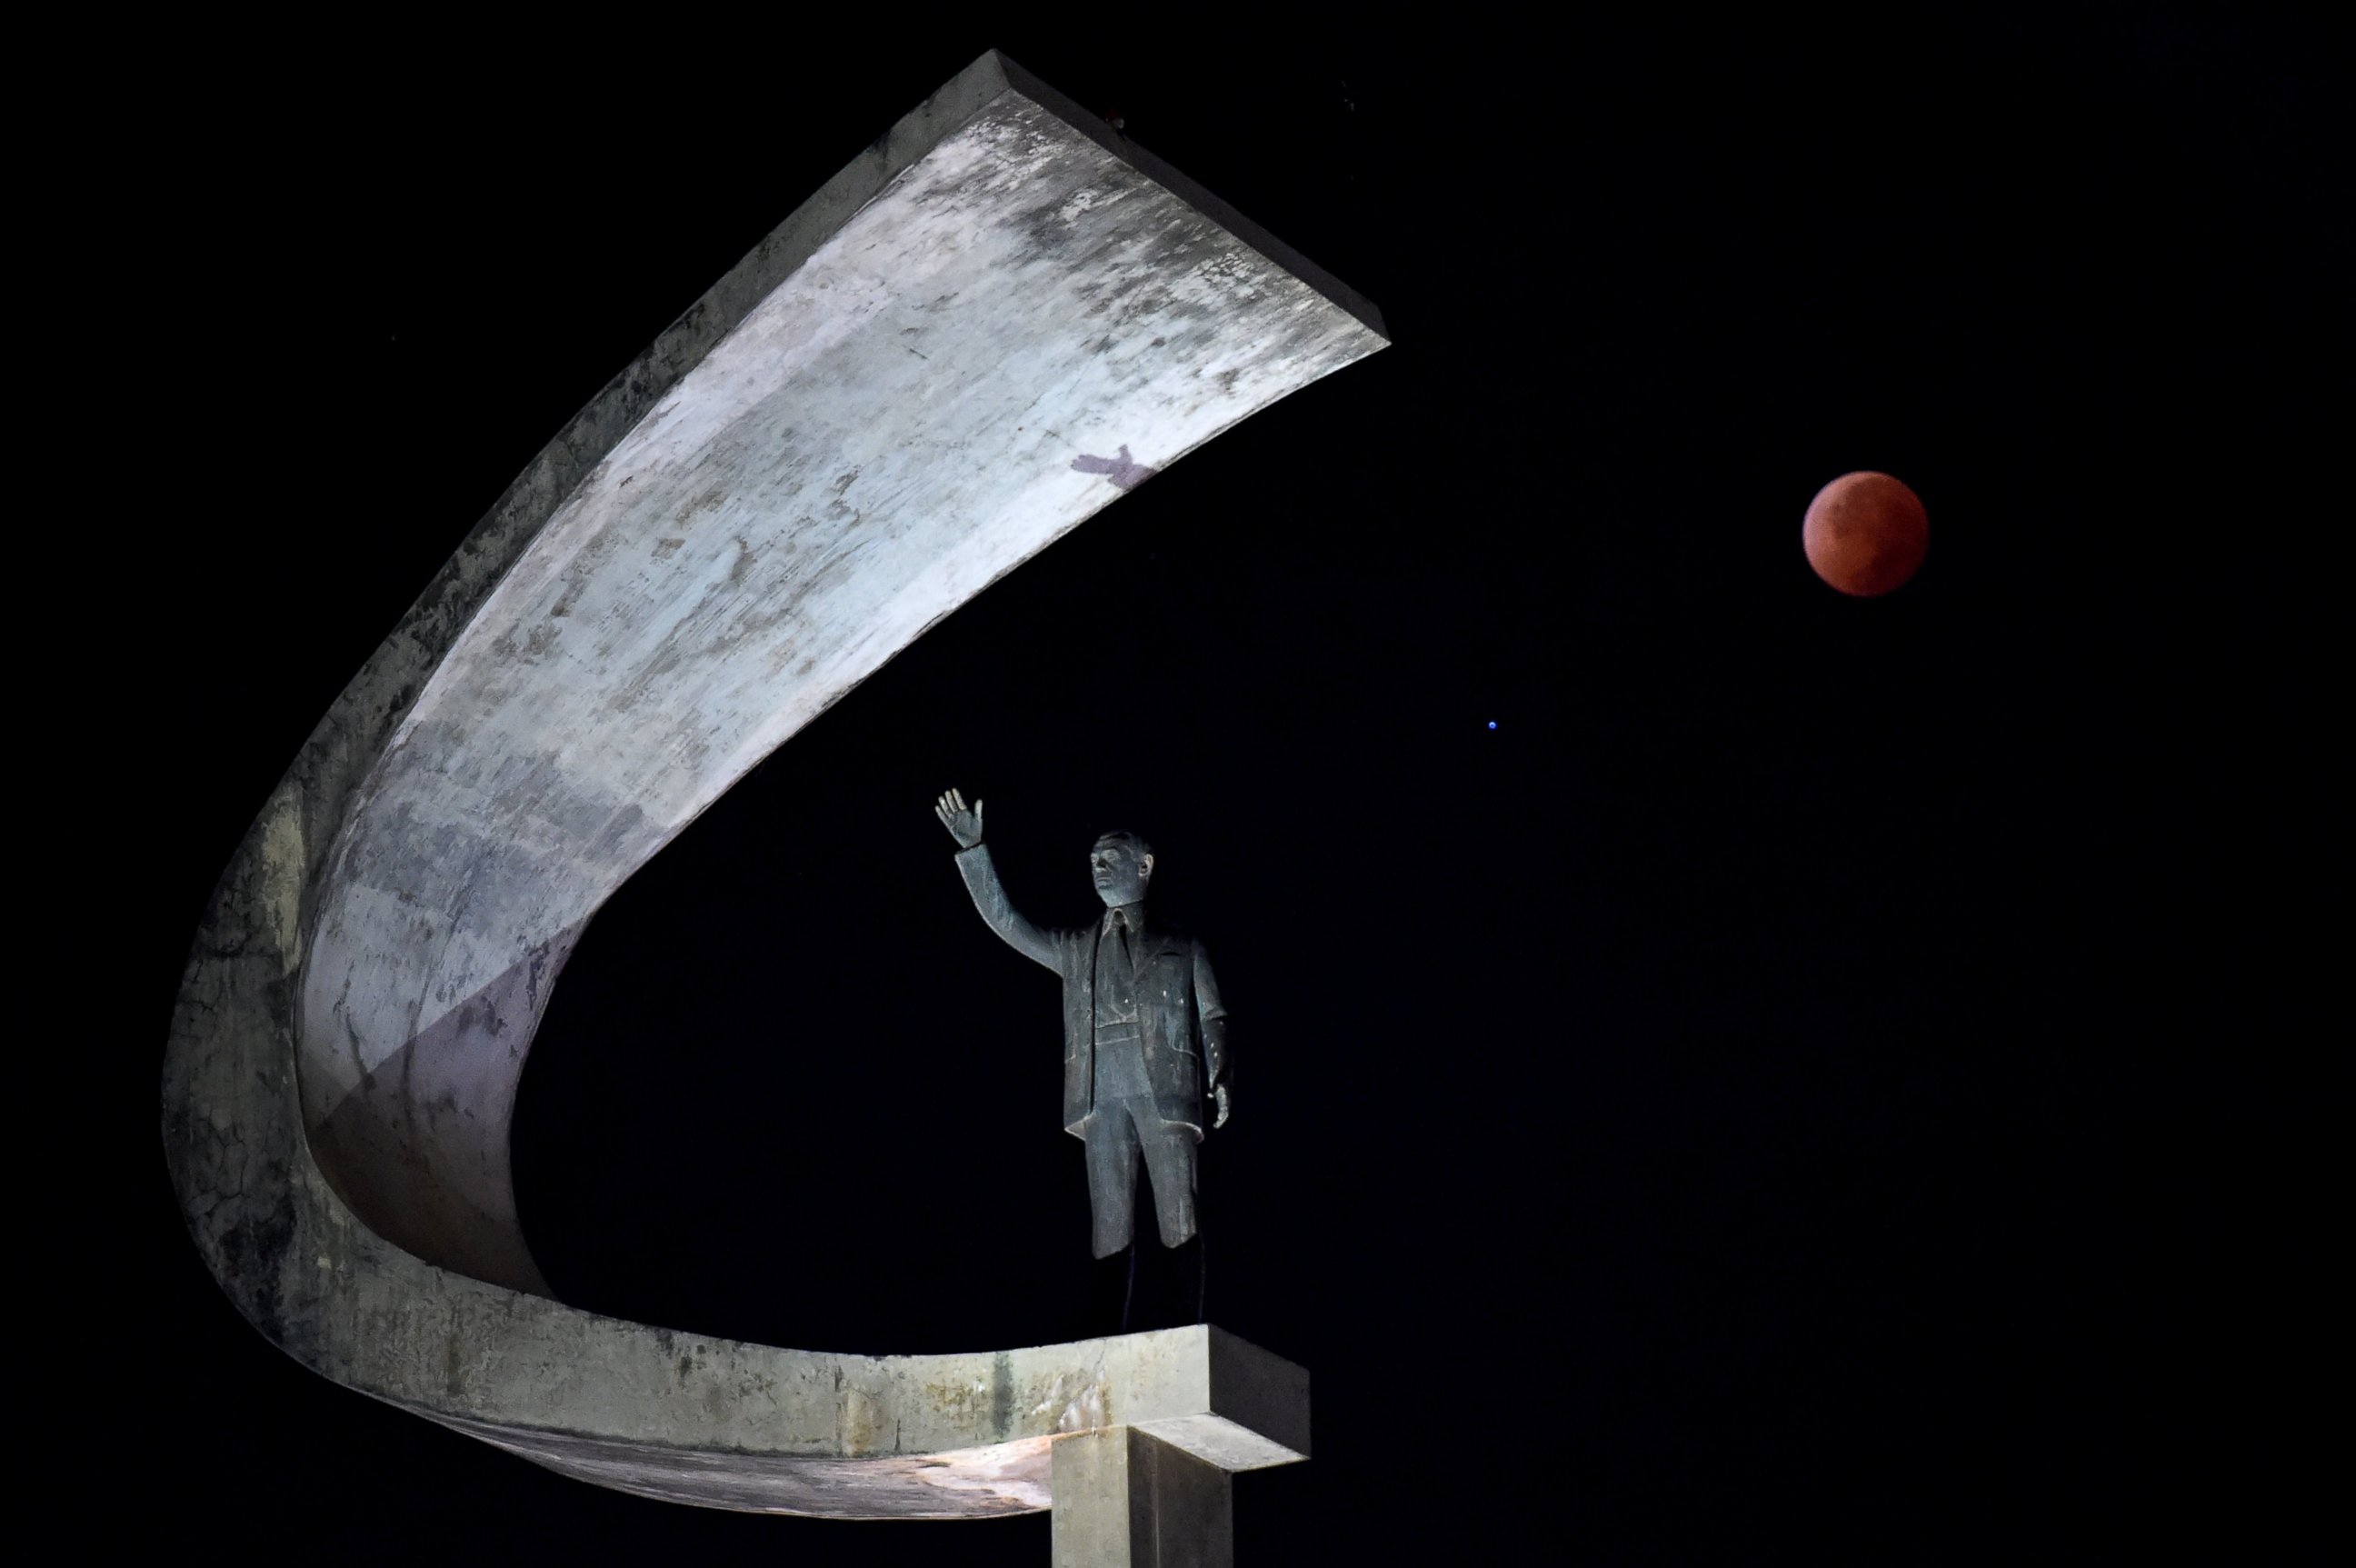 PHOTO: The moon during a total lunar eclipse over the Juscelino Kubitschek Memorial in Brasilia, Brazil.